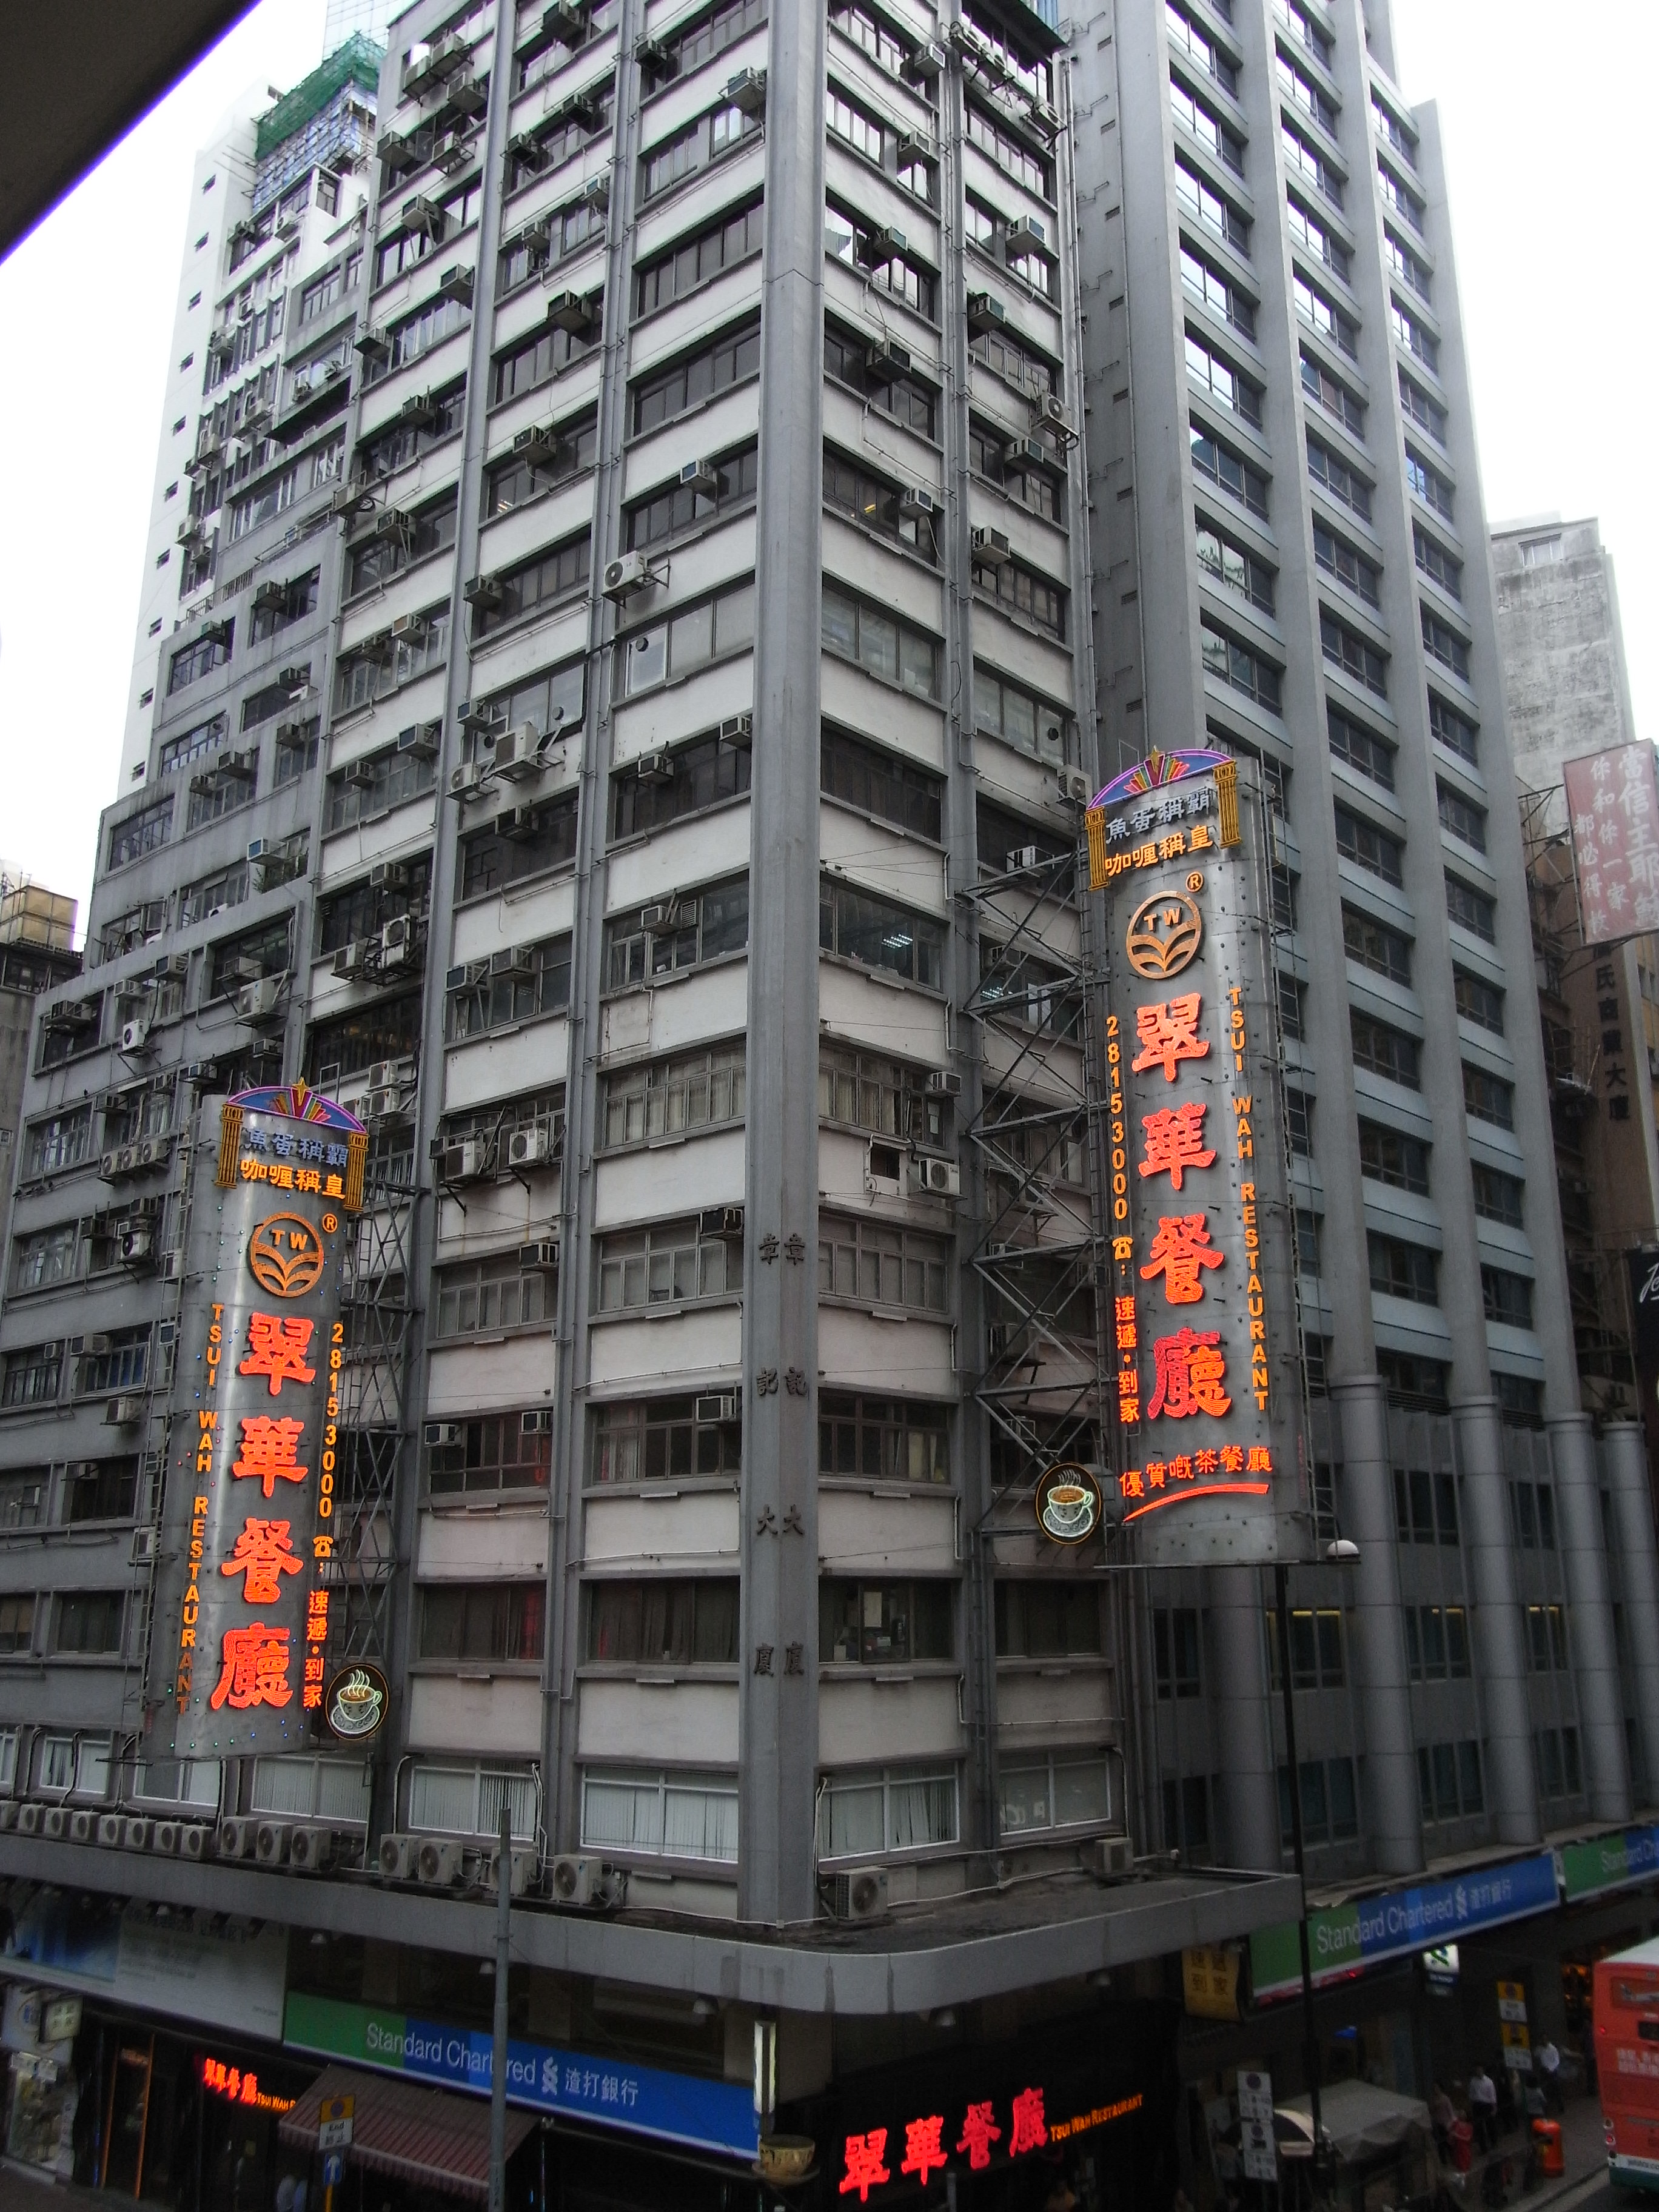 File Hk Central 84 86 Des Voeux Road 章記大廈 Cheong K Building Facade 租庇利街 Jubilee Street April 12 Jpg Wikimedia Commons